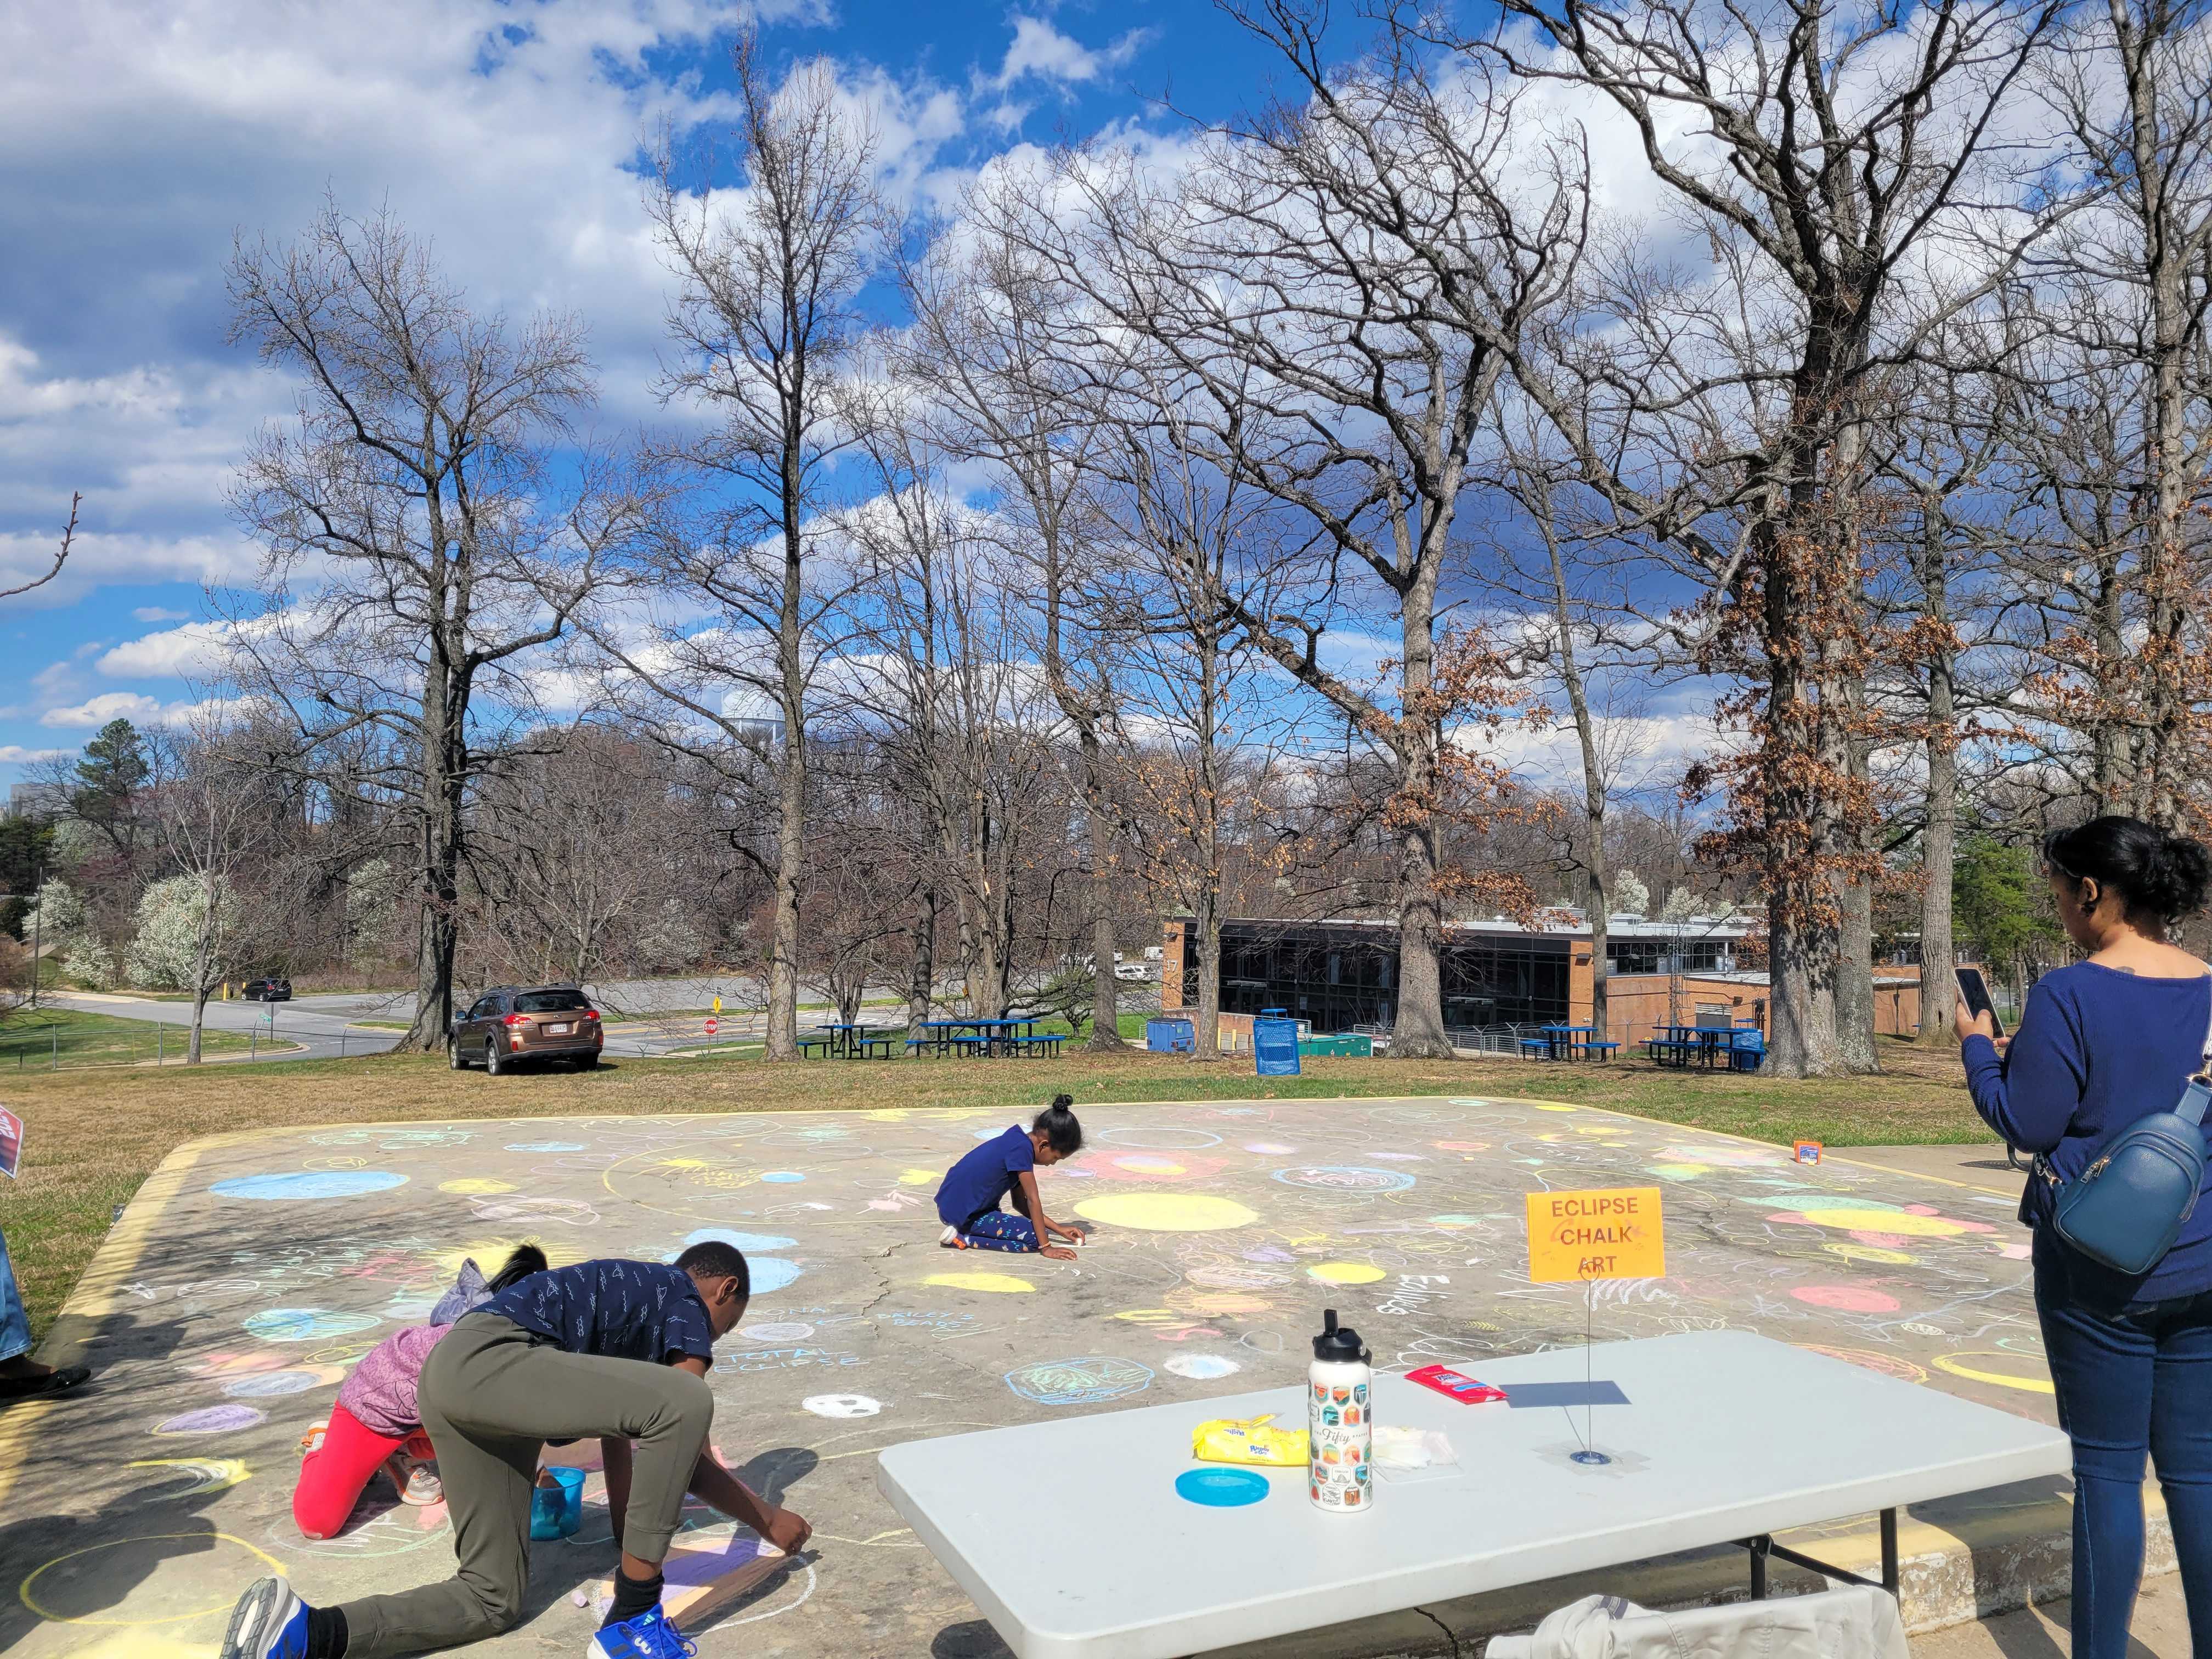 Kids sitting on a concrete pad are using chalk to draw Sun and space-themed drawings on the ground.